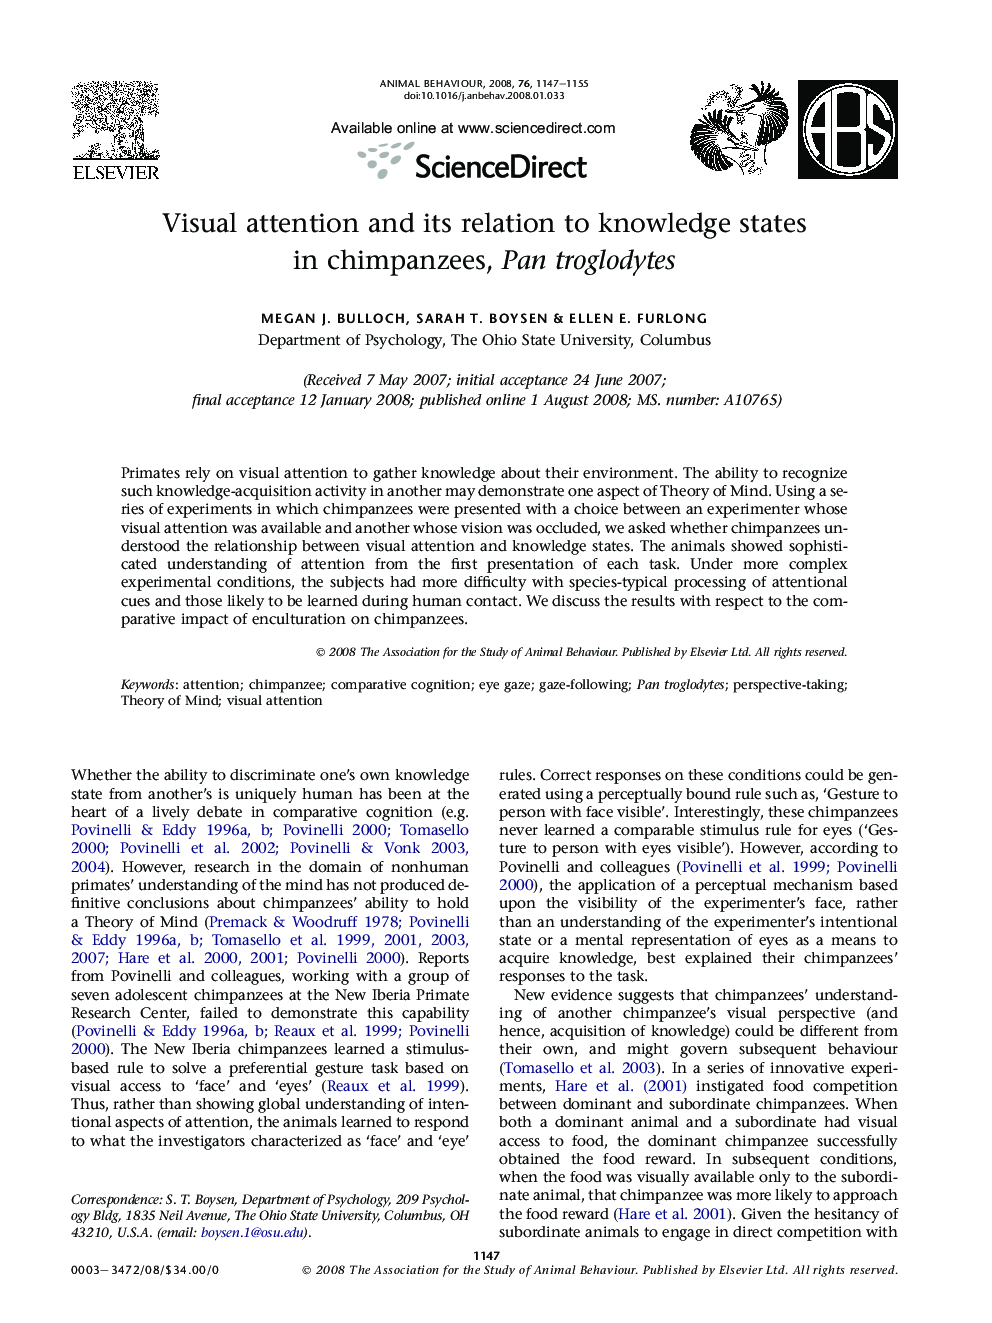 Visual attention and its relation to knowledge states in chimpanzees, Pan troglodytes